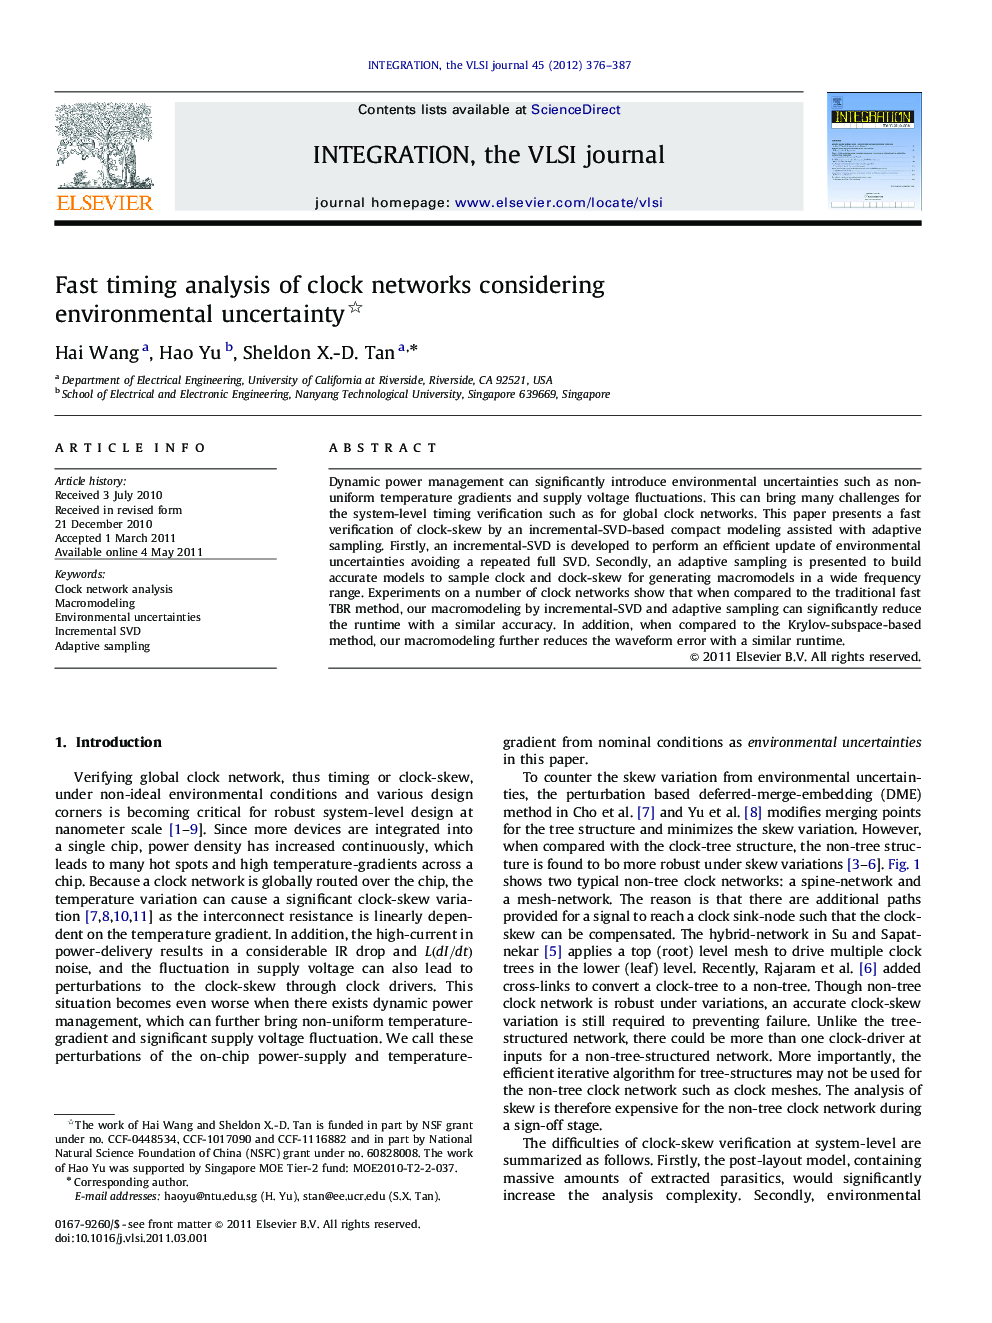 Fast timing analysis of clock networks considering environmental uncertainty 